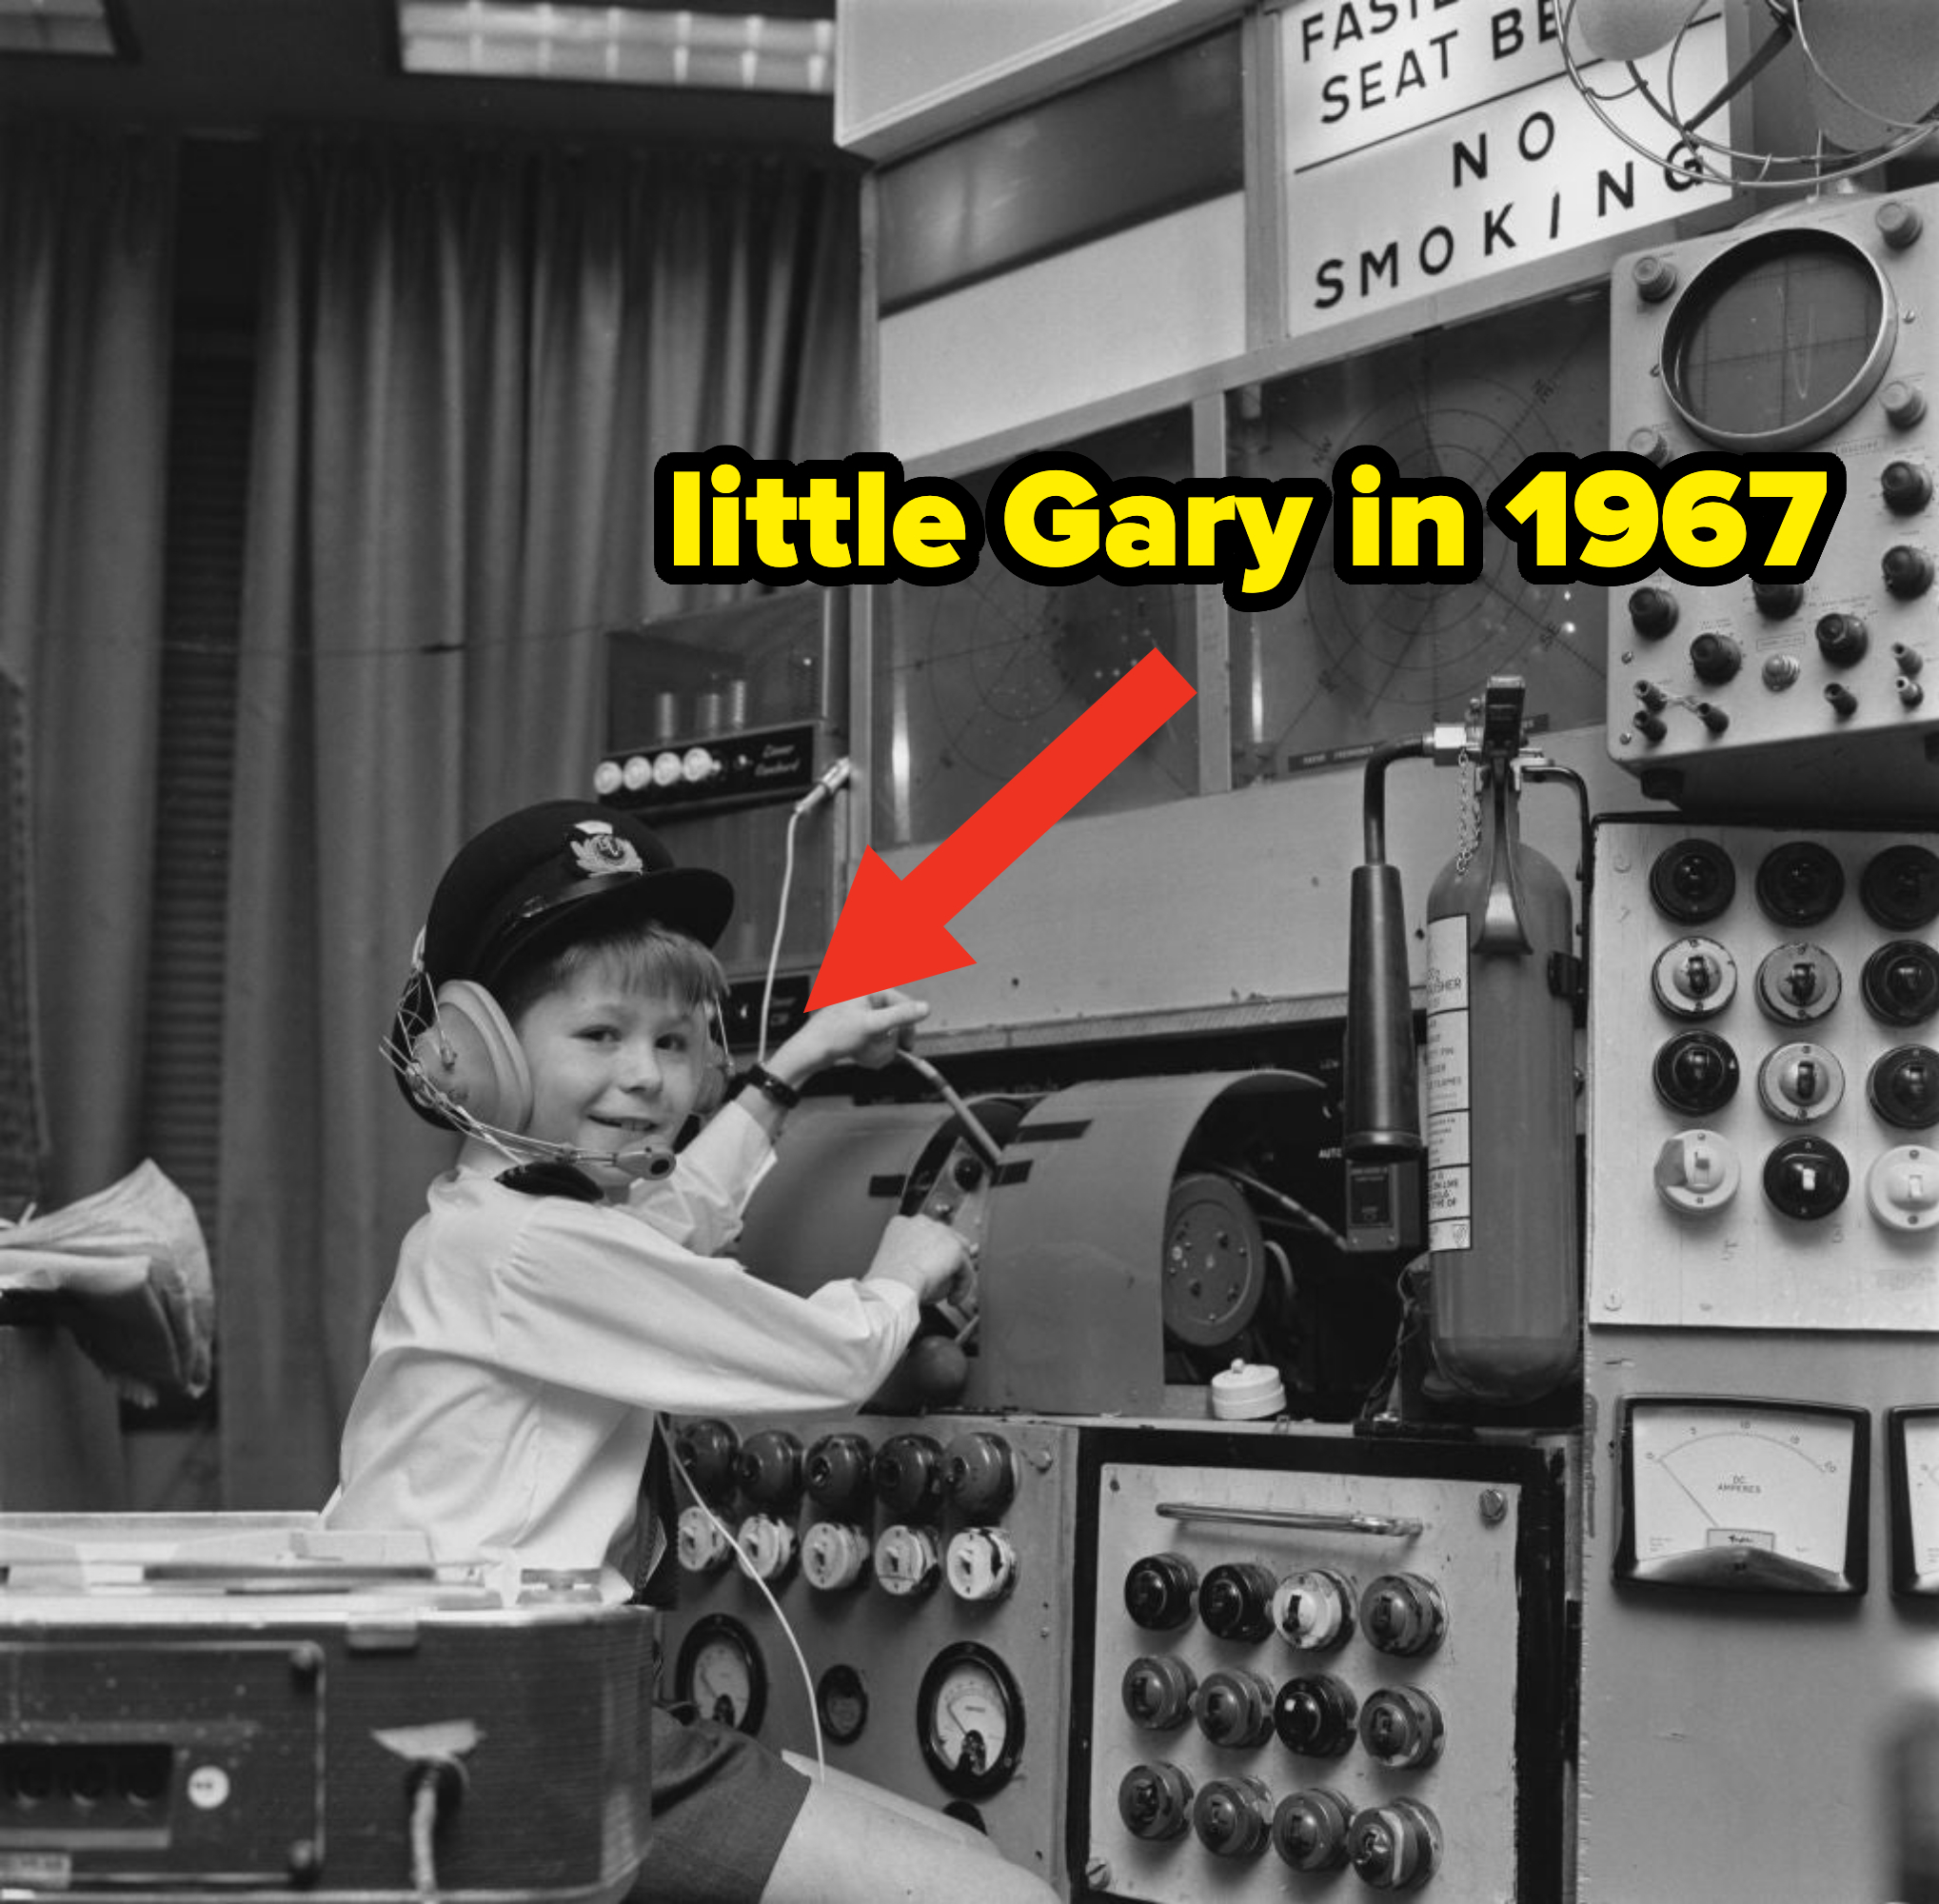 Gary as a child